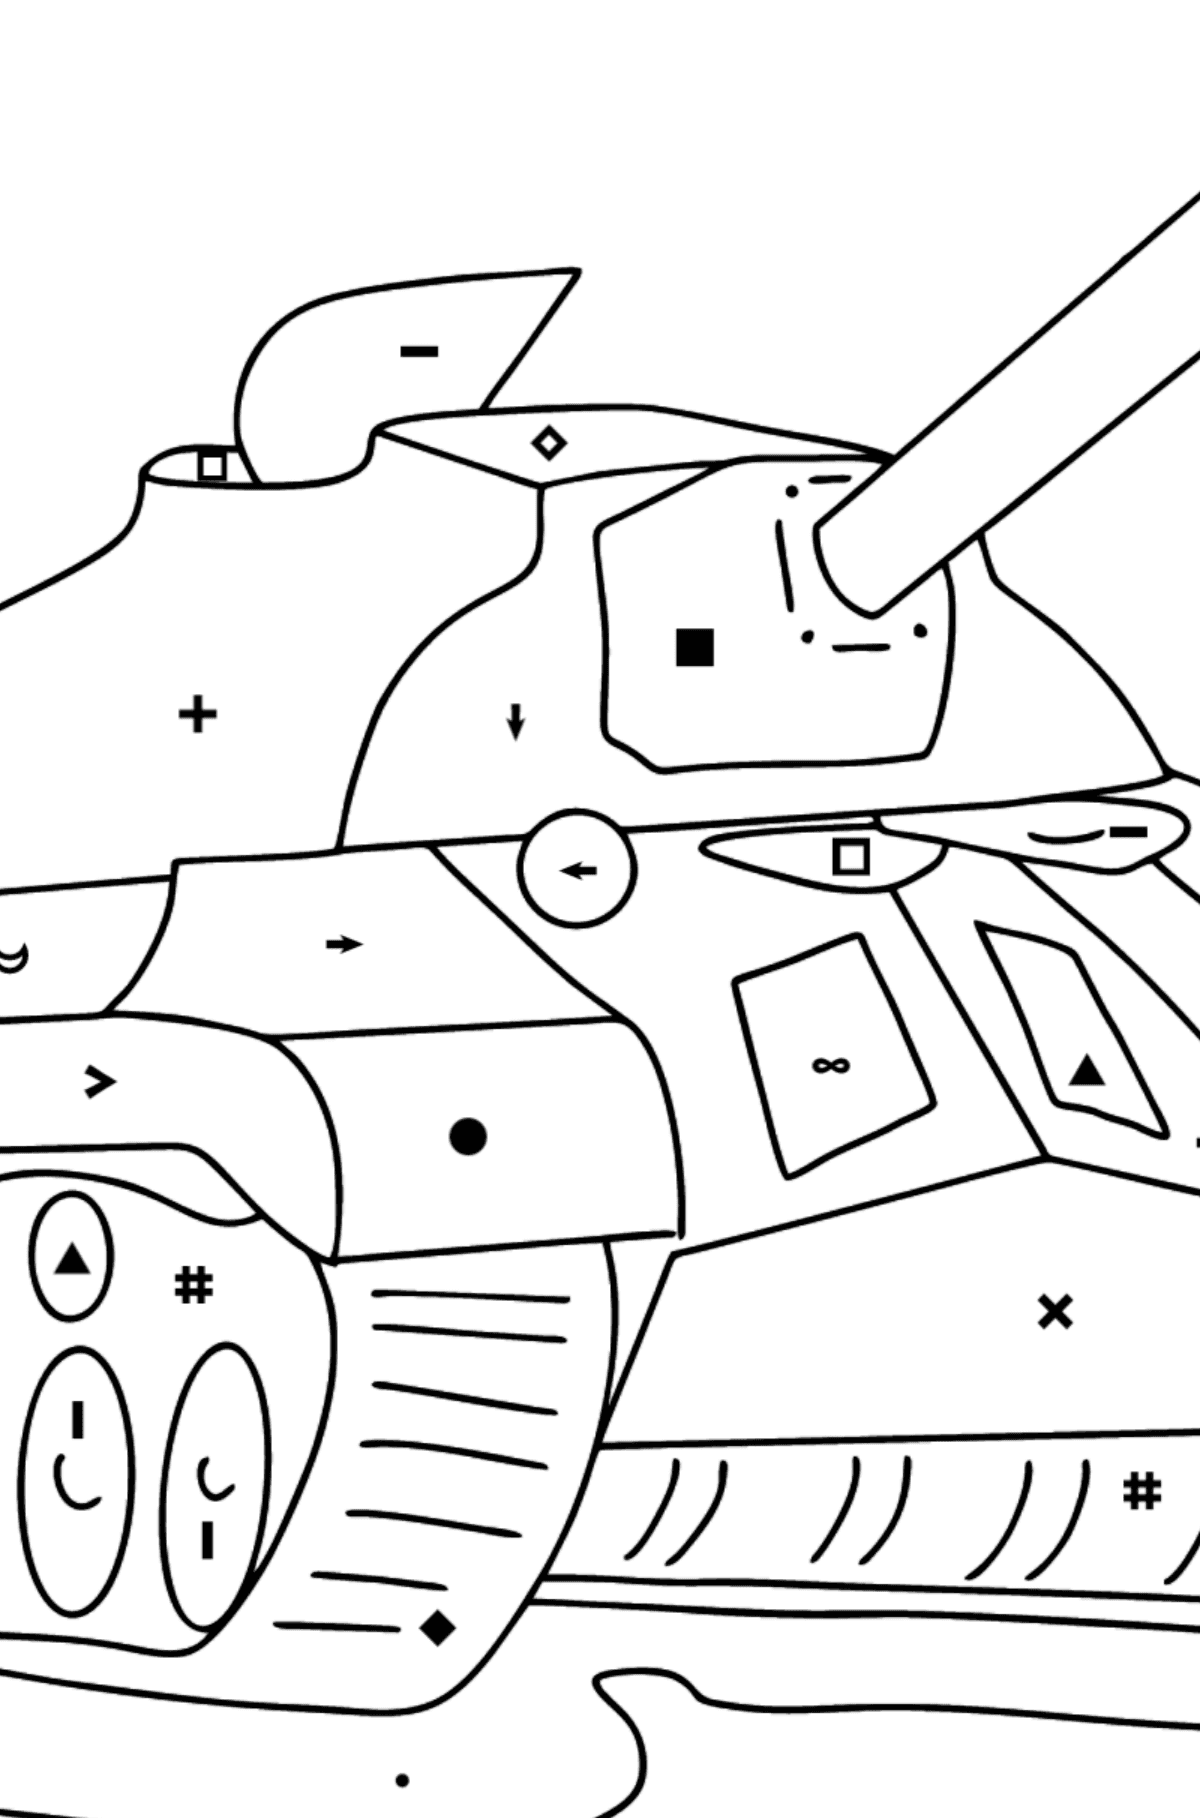 Tank IS 3 coloring page - Coloring by Symbols for Kids